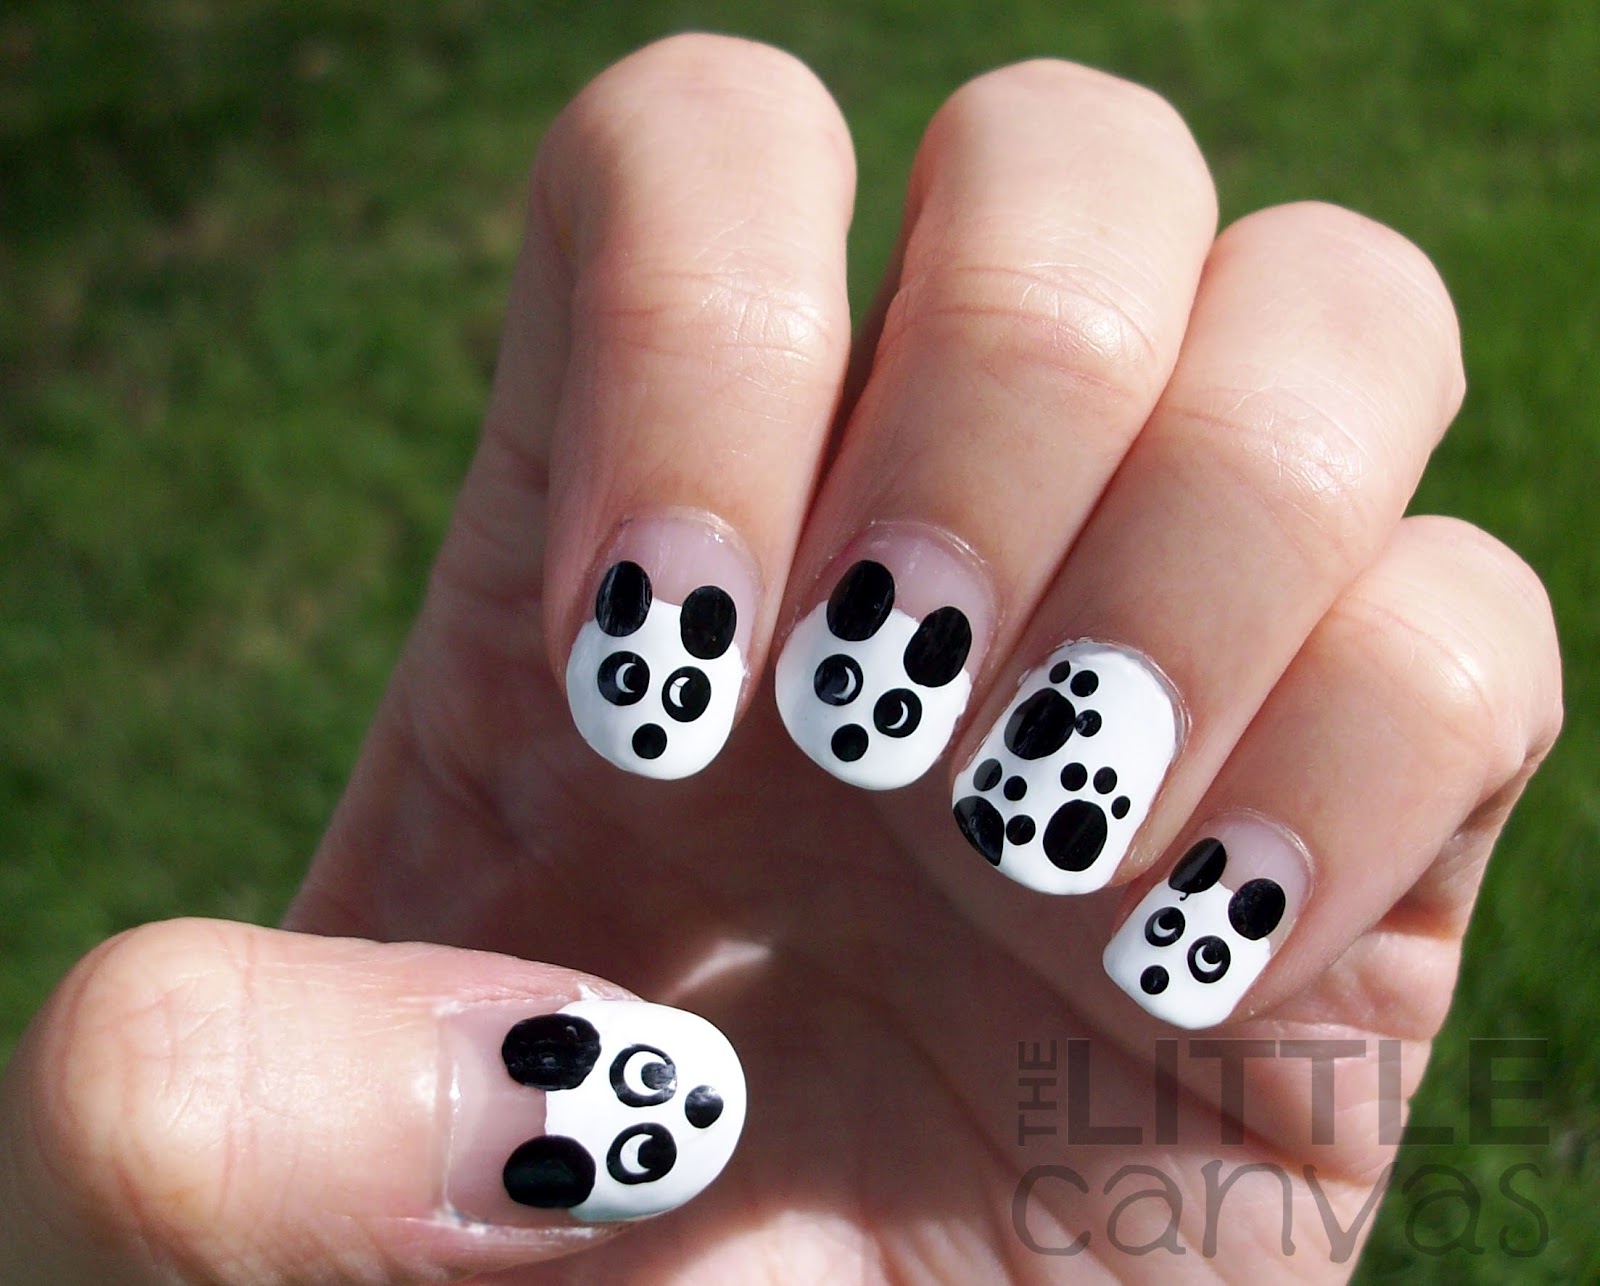 31 Day Challenge - Day 8 - Black and White - Pandas! - The Little Canvas